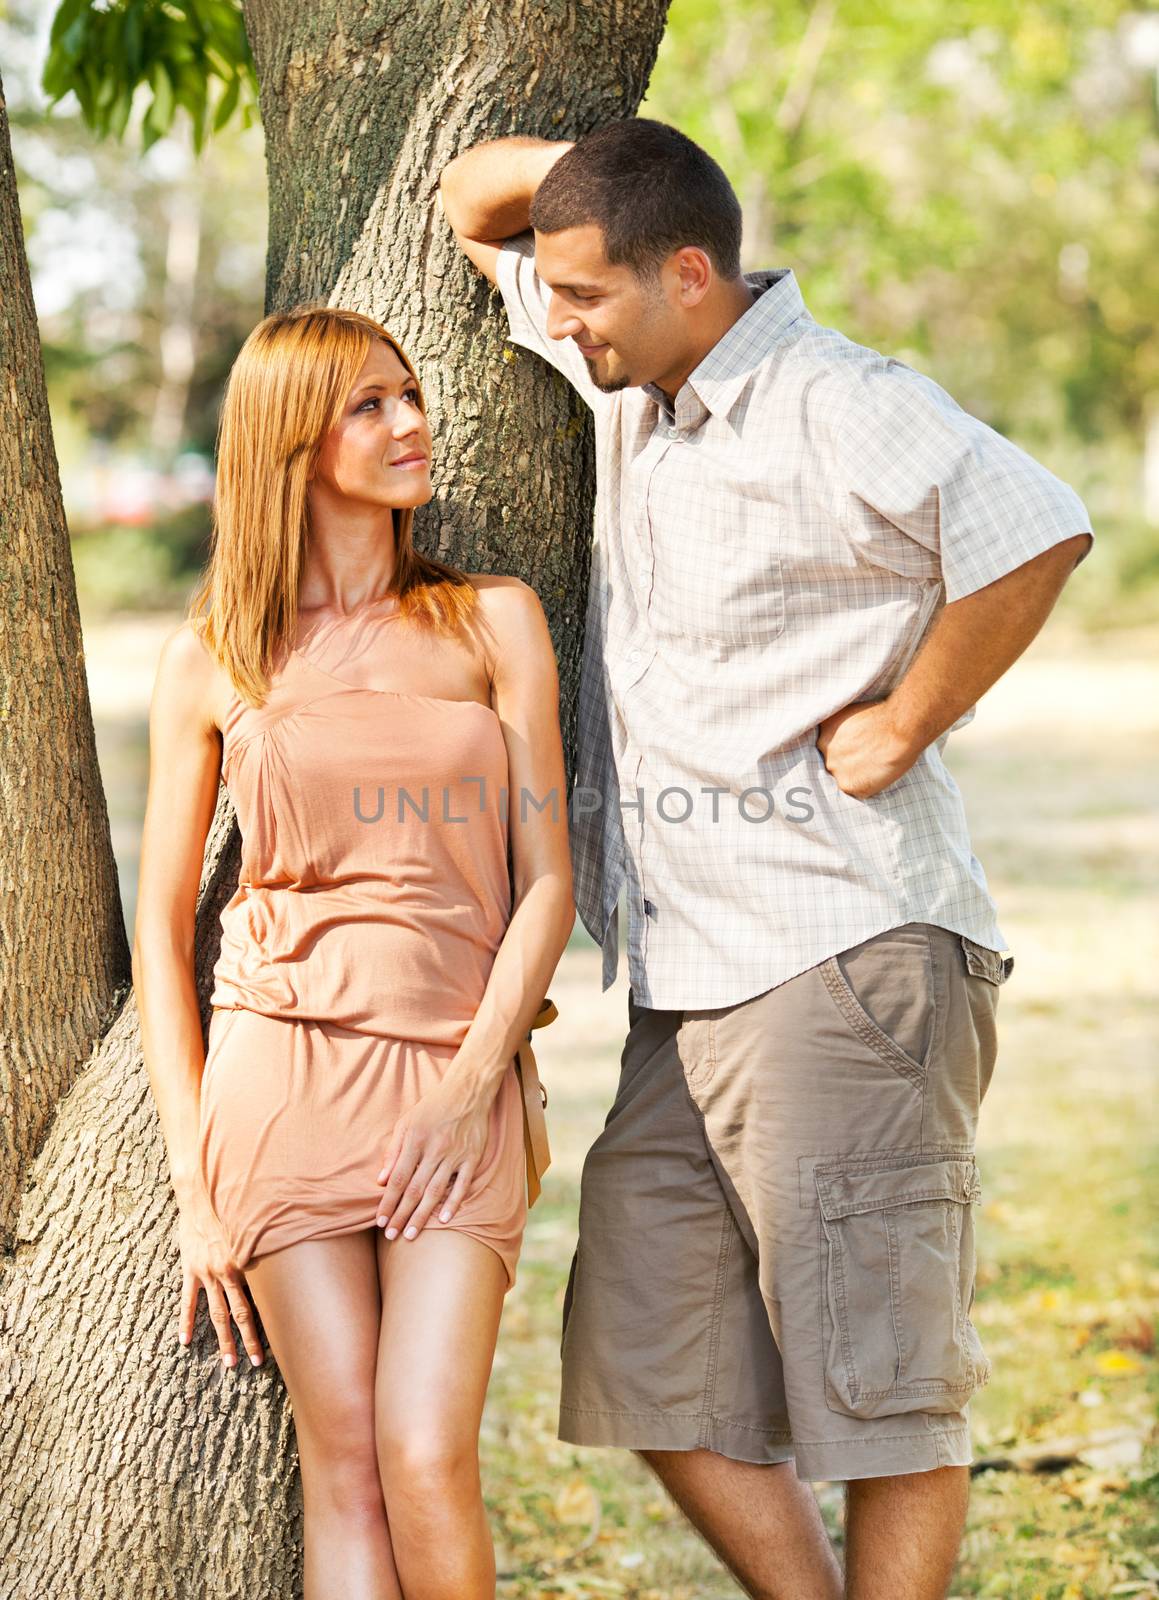 Two young people flirting in the nature